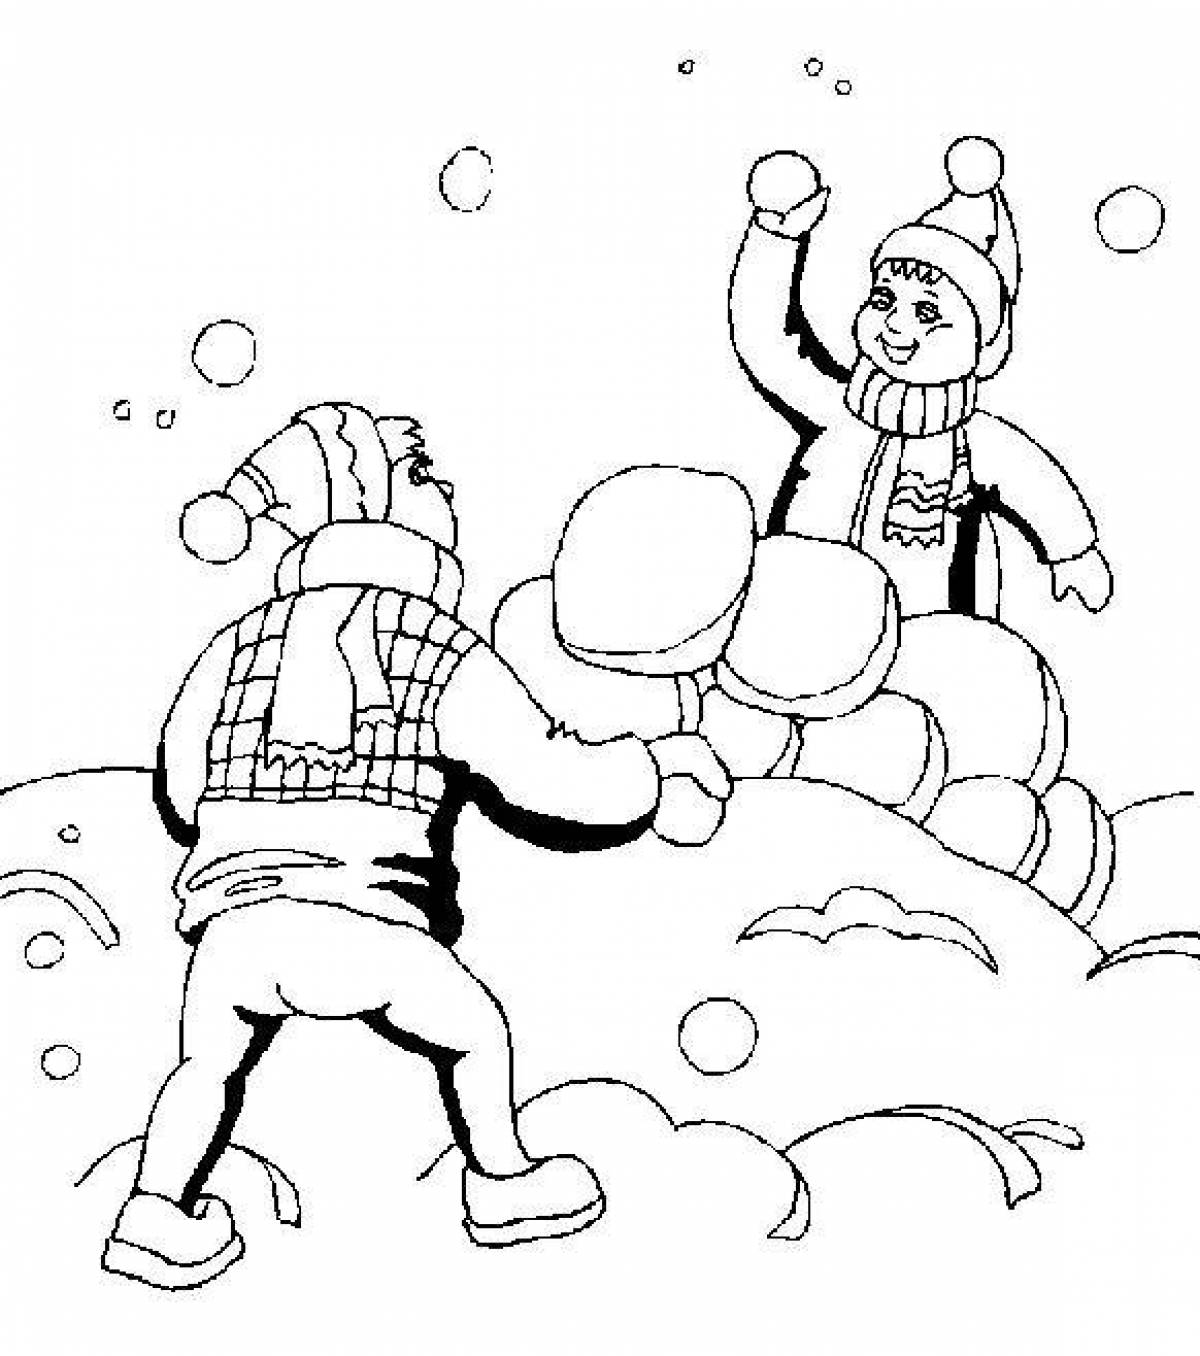 Crazy coloring snowball fight